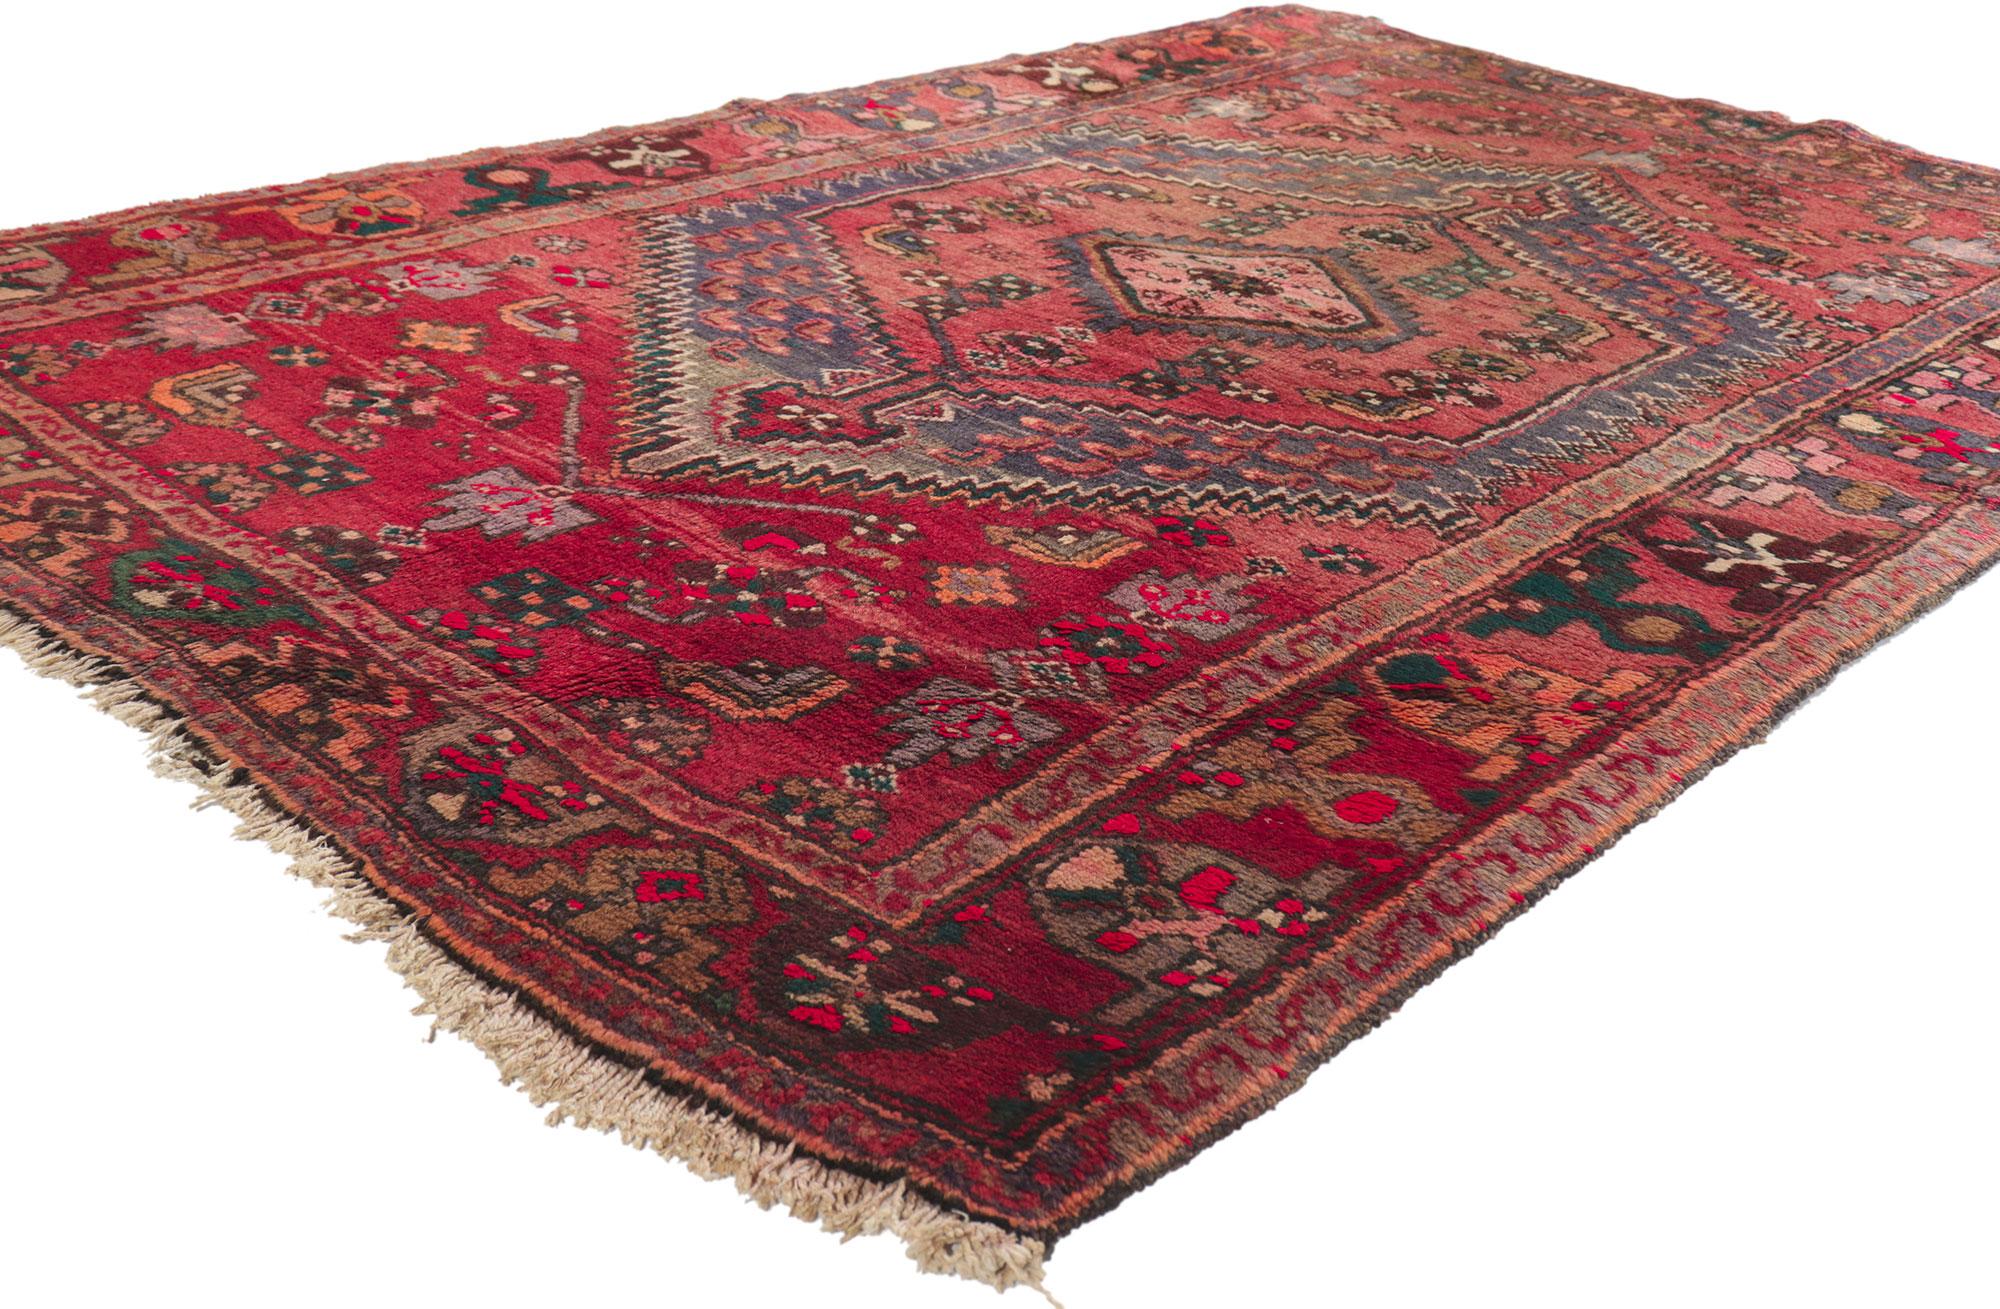 21692 Antique Red Persian Tribal Hamadan Rug, 04'03 x 06'06. Skillfully crafted and poised to leave a lasting impression with its rustic charm, this hand-knotted wool antique Persian Hamadan rug embodies a rich ancestoral history and heritage.